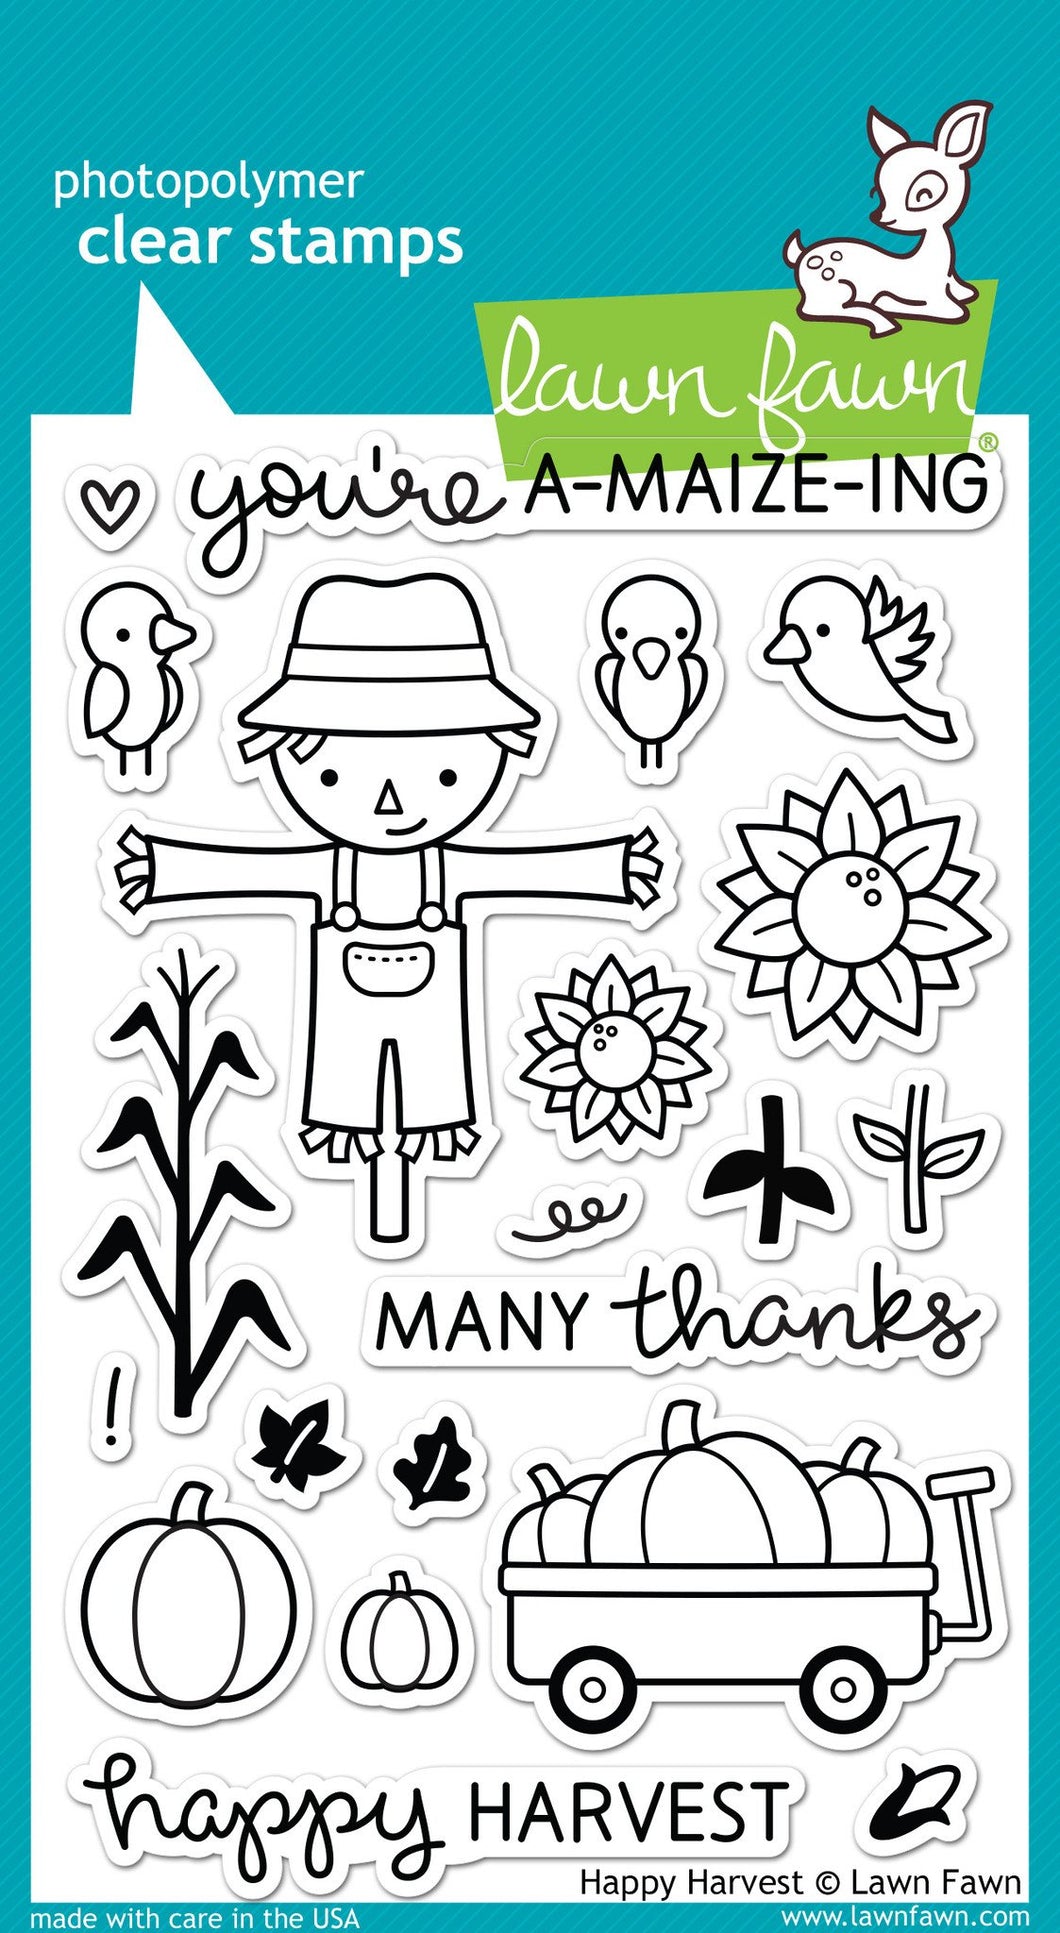 Lawn Fawn-Clear Stamps-Happy Harvest - Design Creative Bling